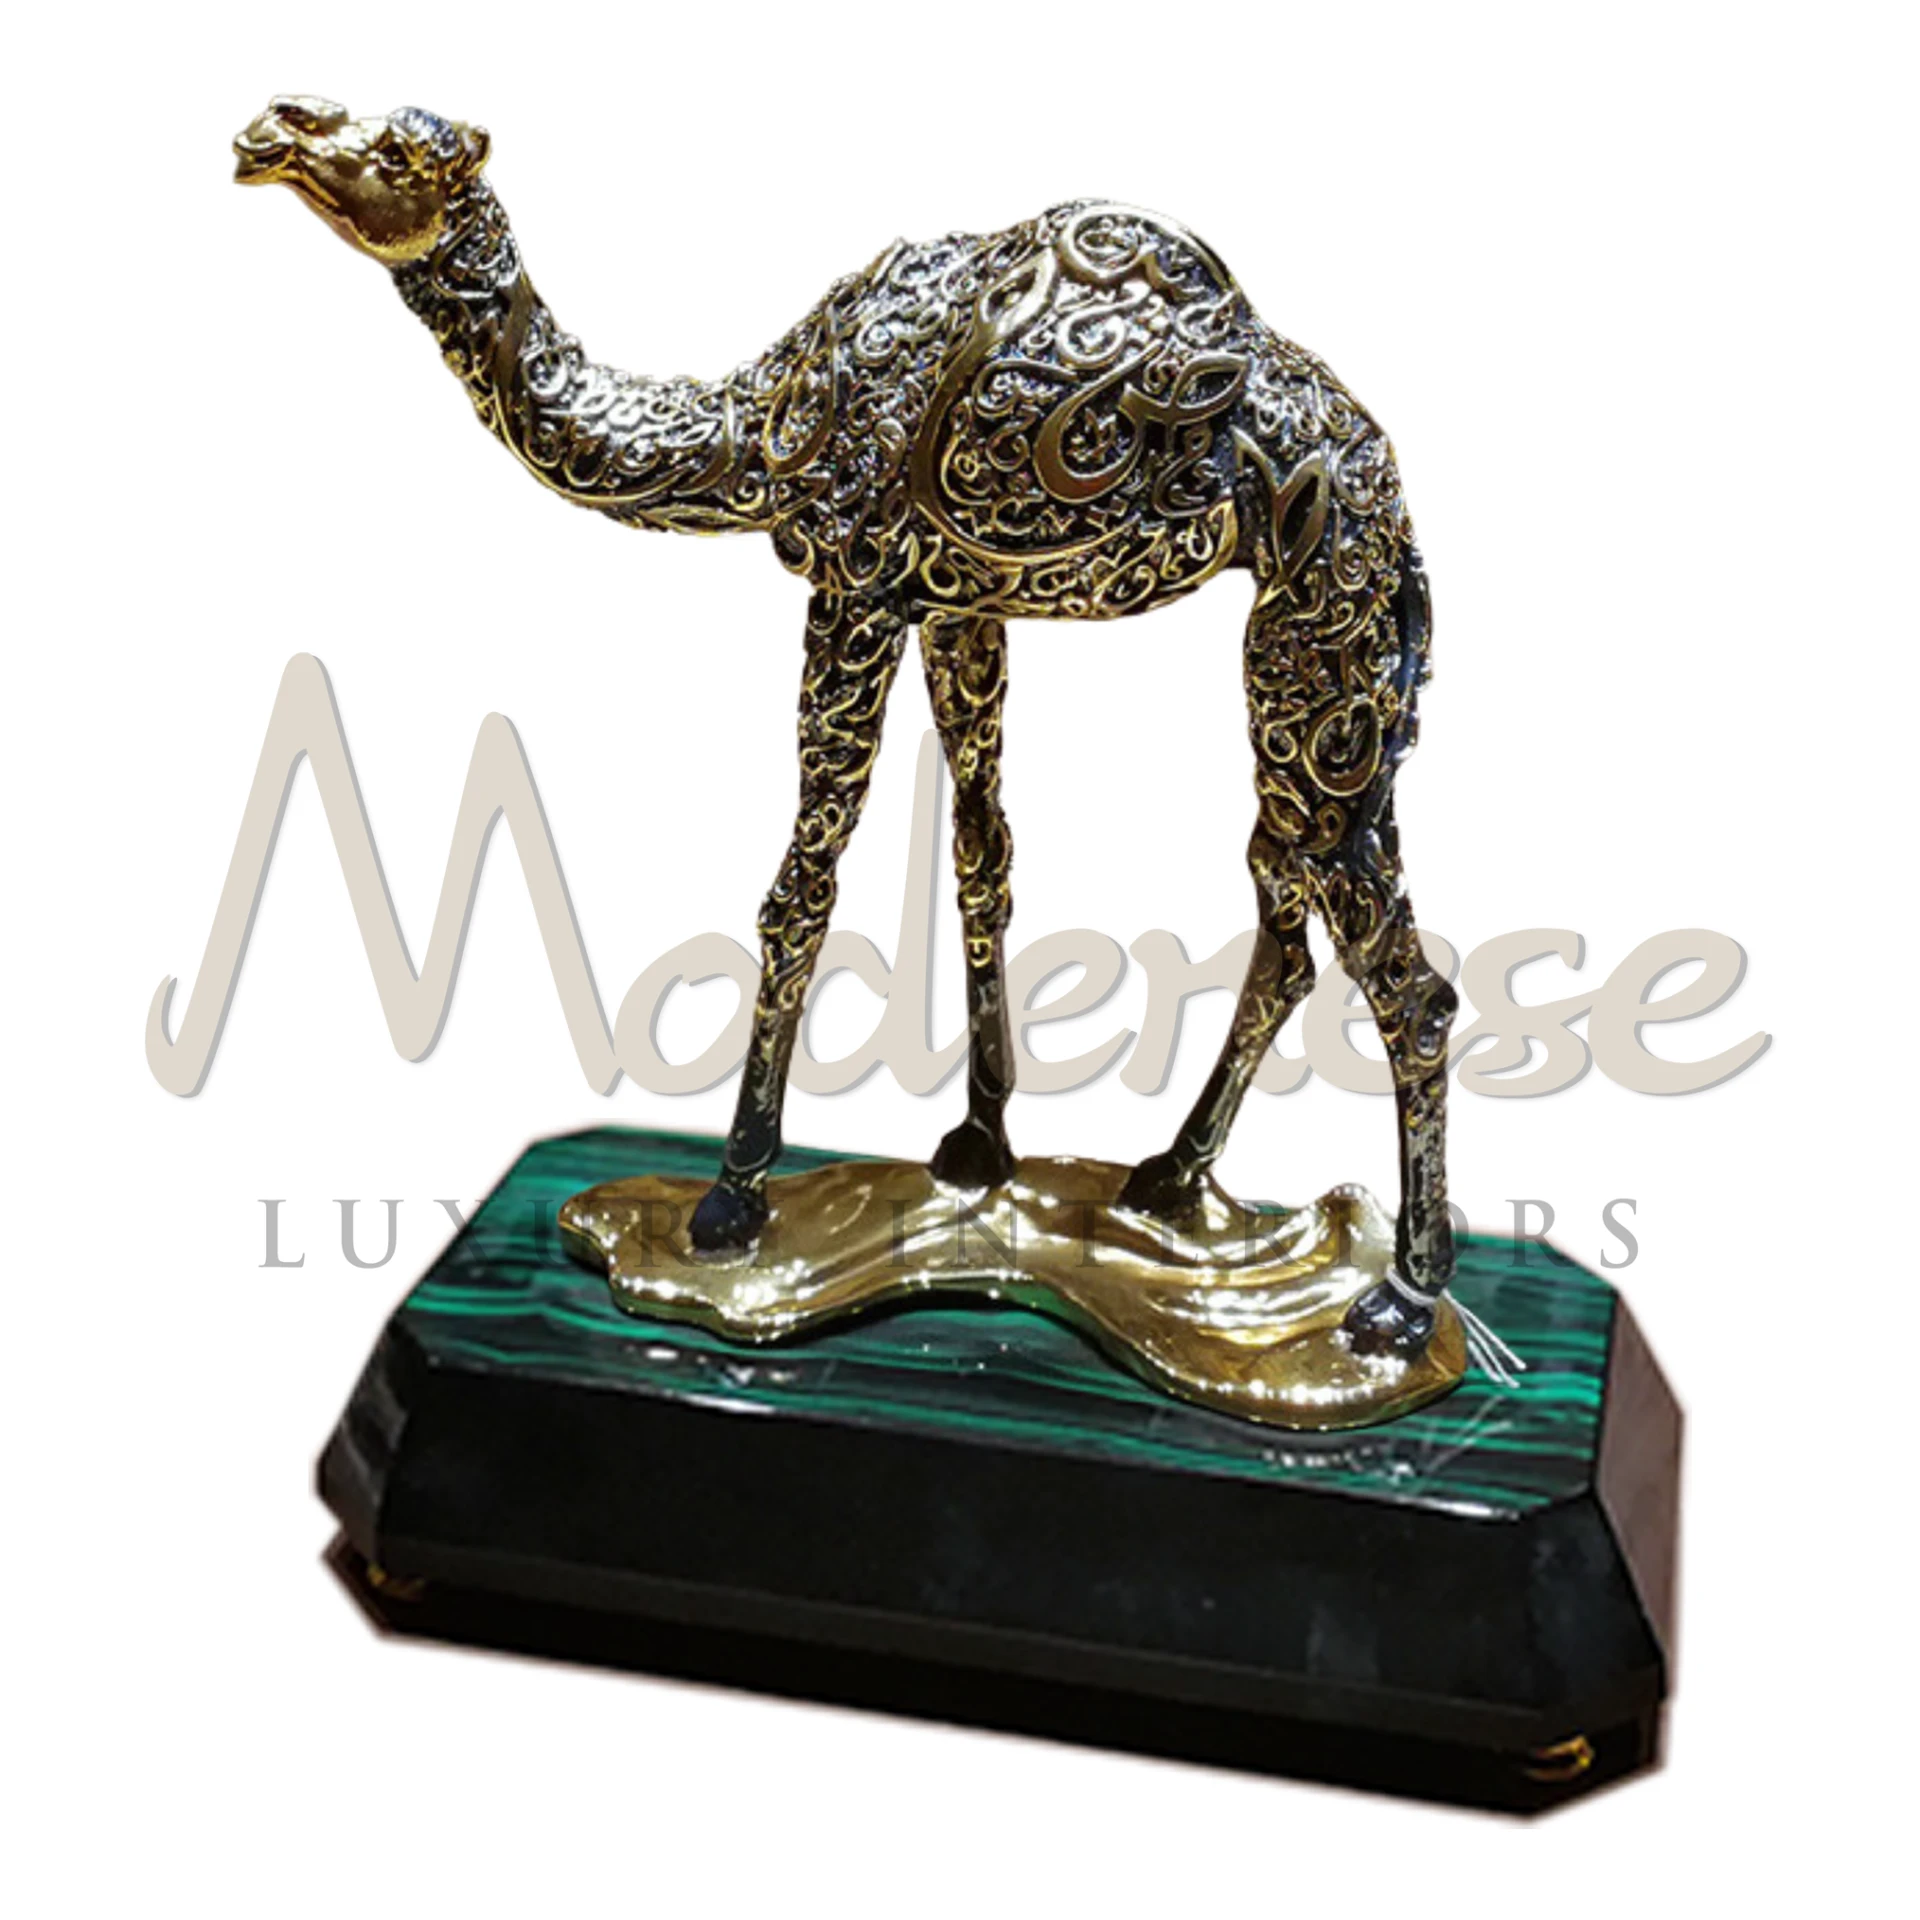 Gorgeous Camel ornament, crafted with intricate details and luxurious embellishments, ideal for enhancing any home decor with a touch of classic elegance.






